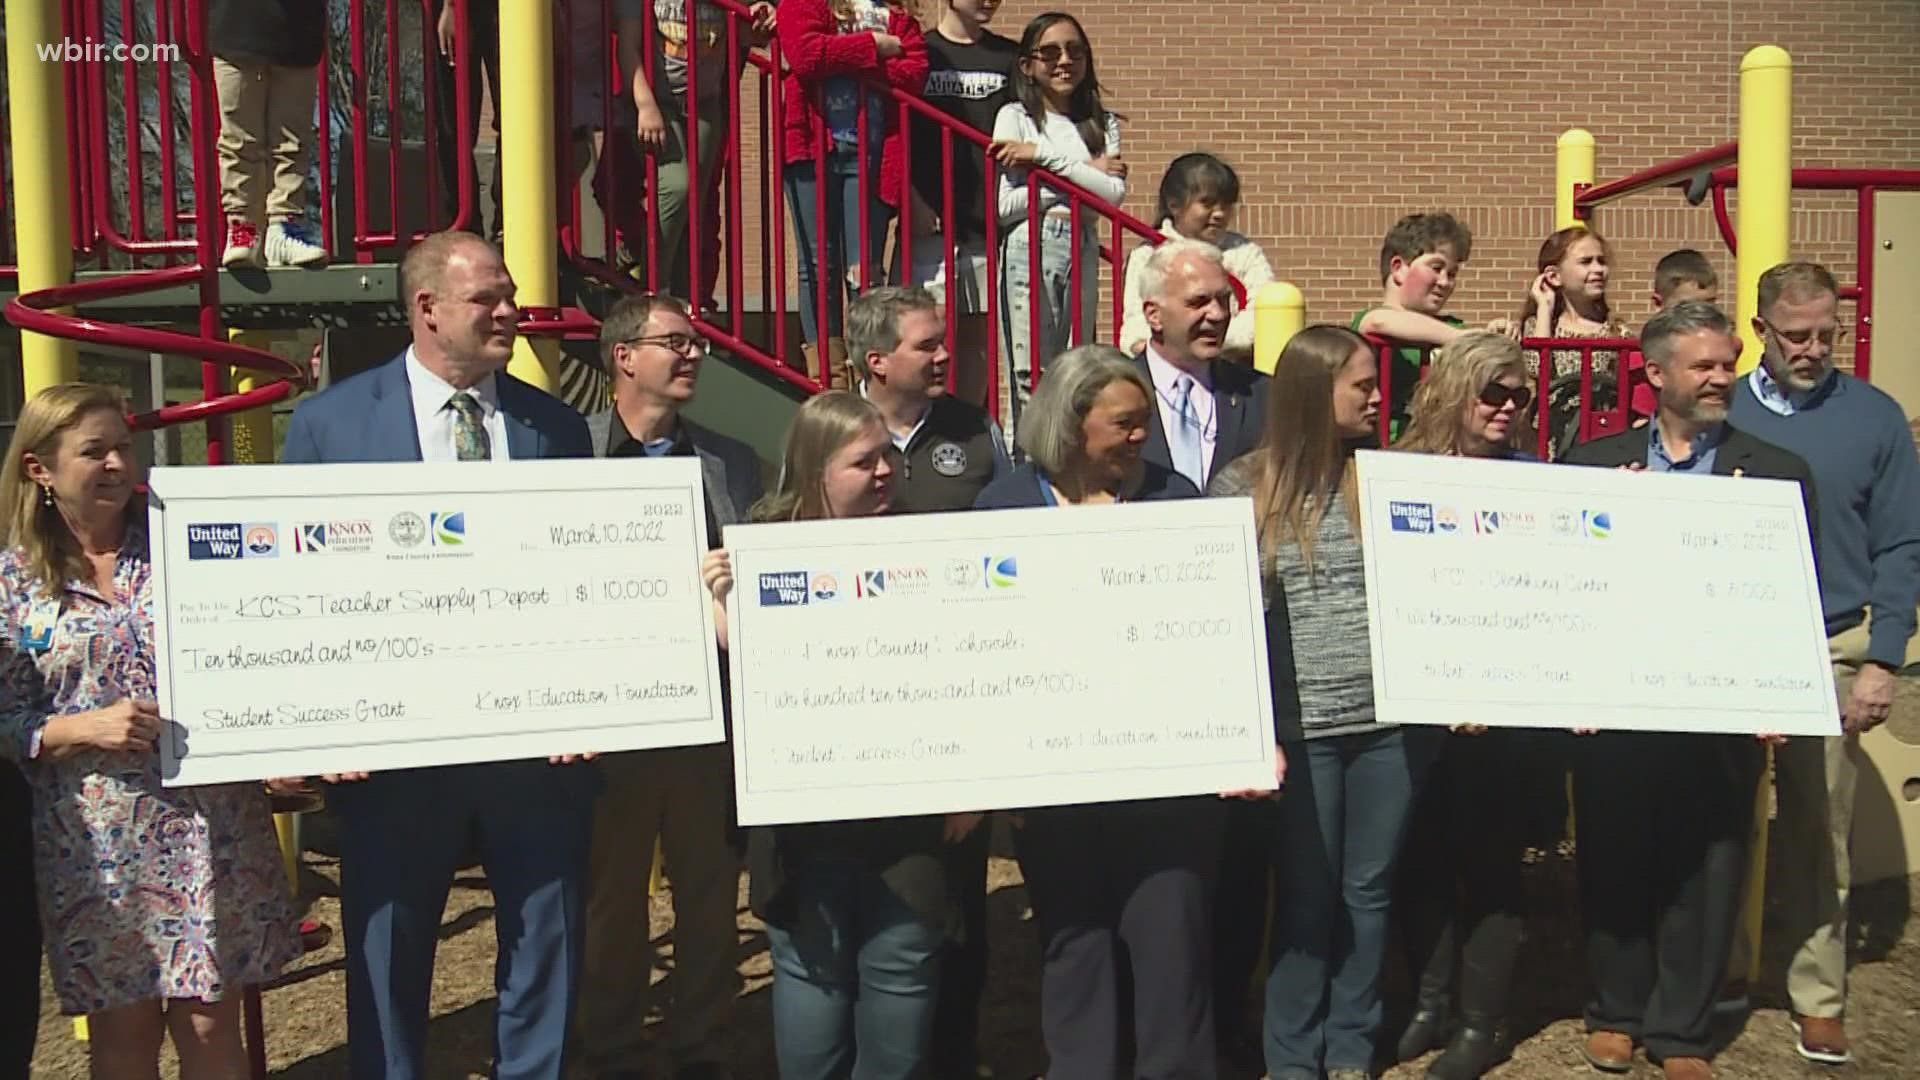 The grants were given as part of a partnership between United Way and the Knox Education Foundation.